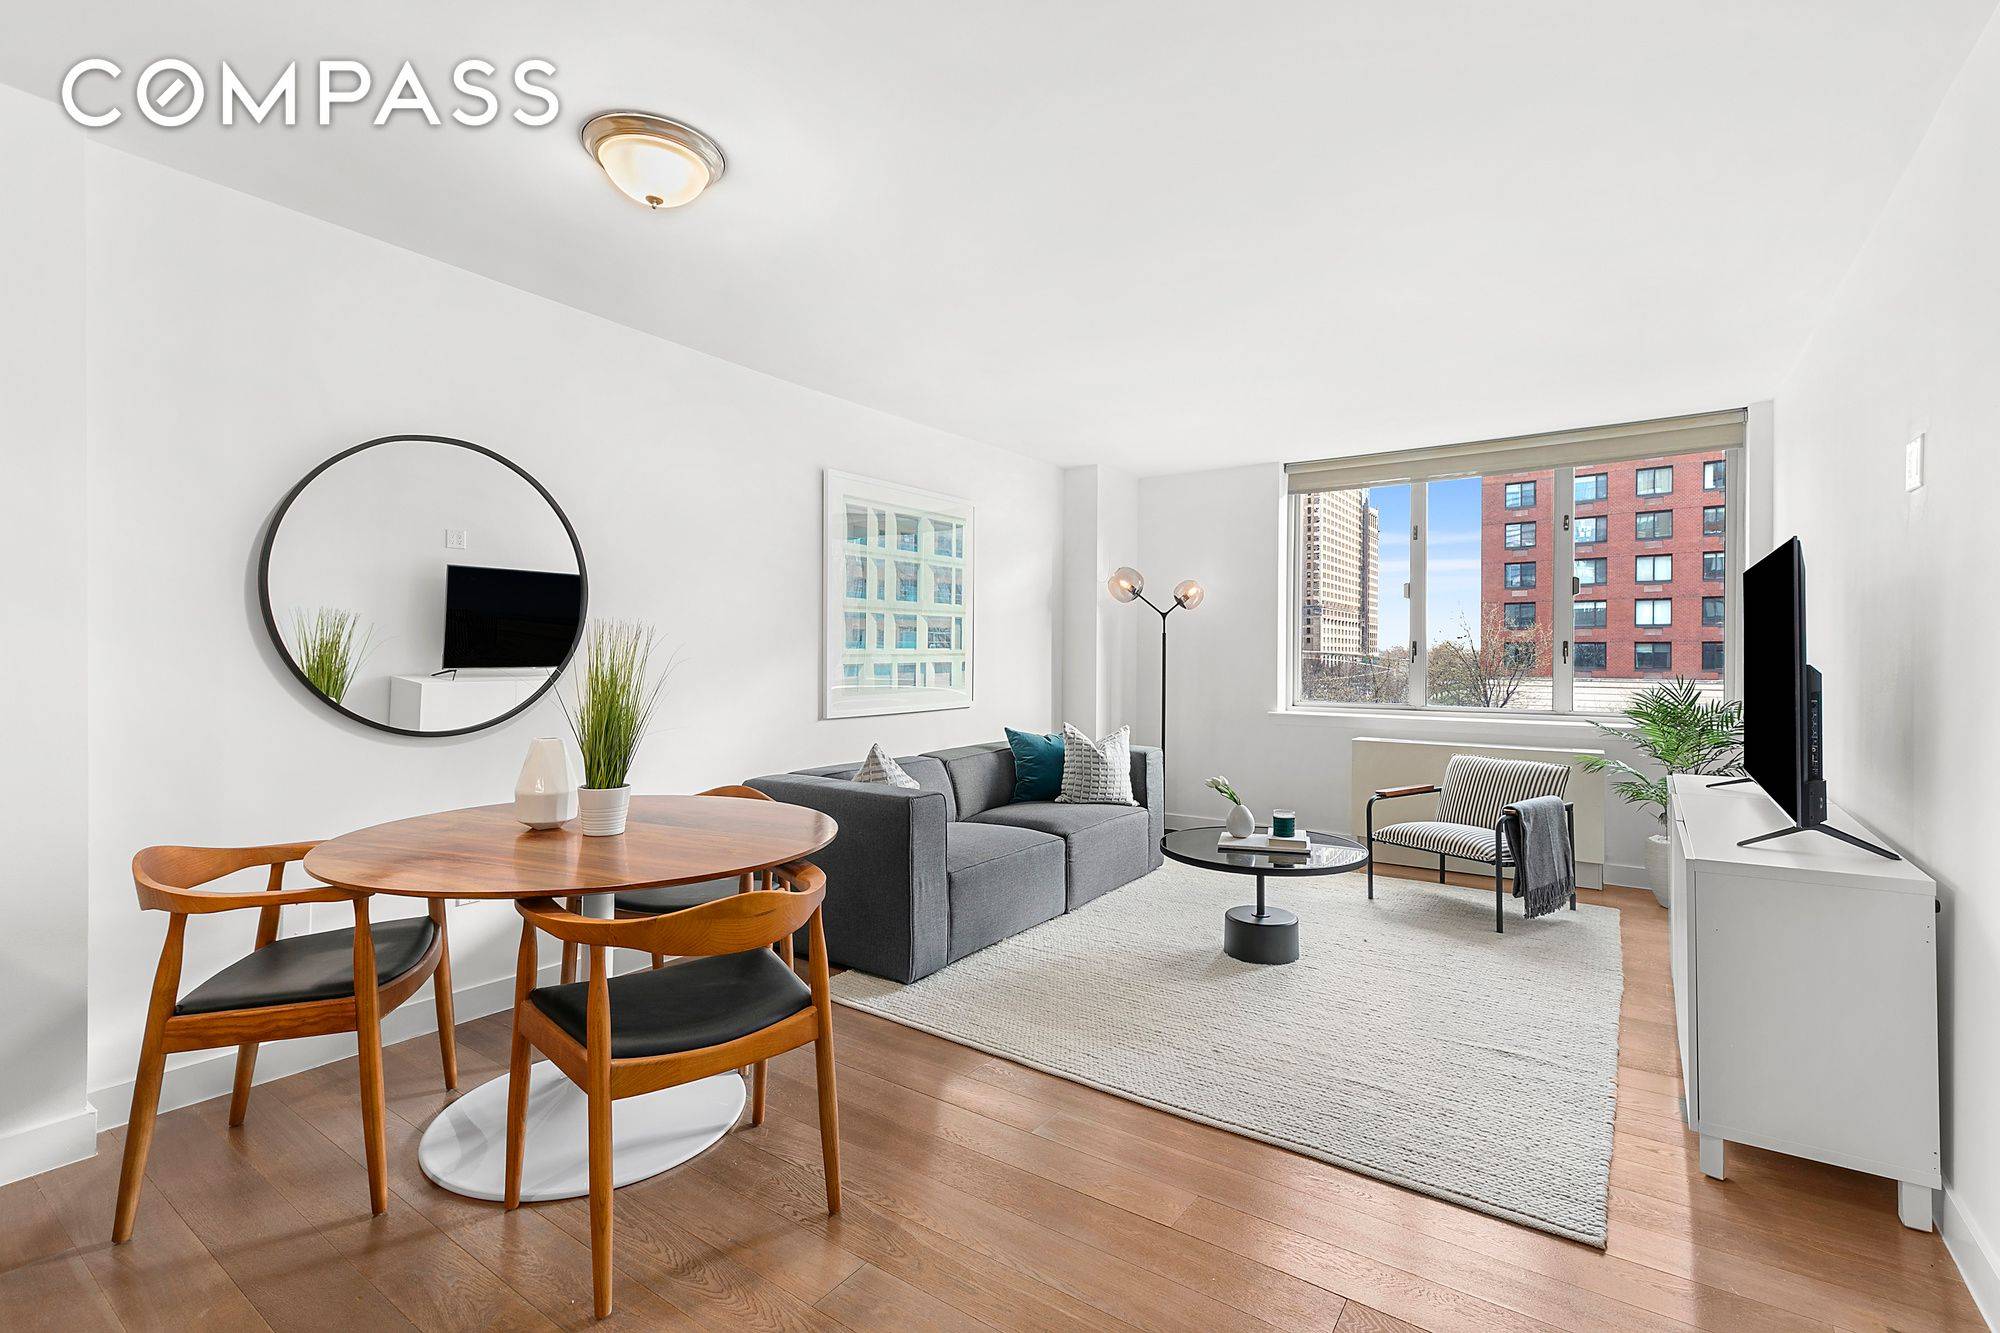 Welcome to 225 Rector Place, Battery Park City s premiere condominium.